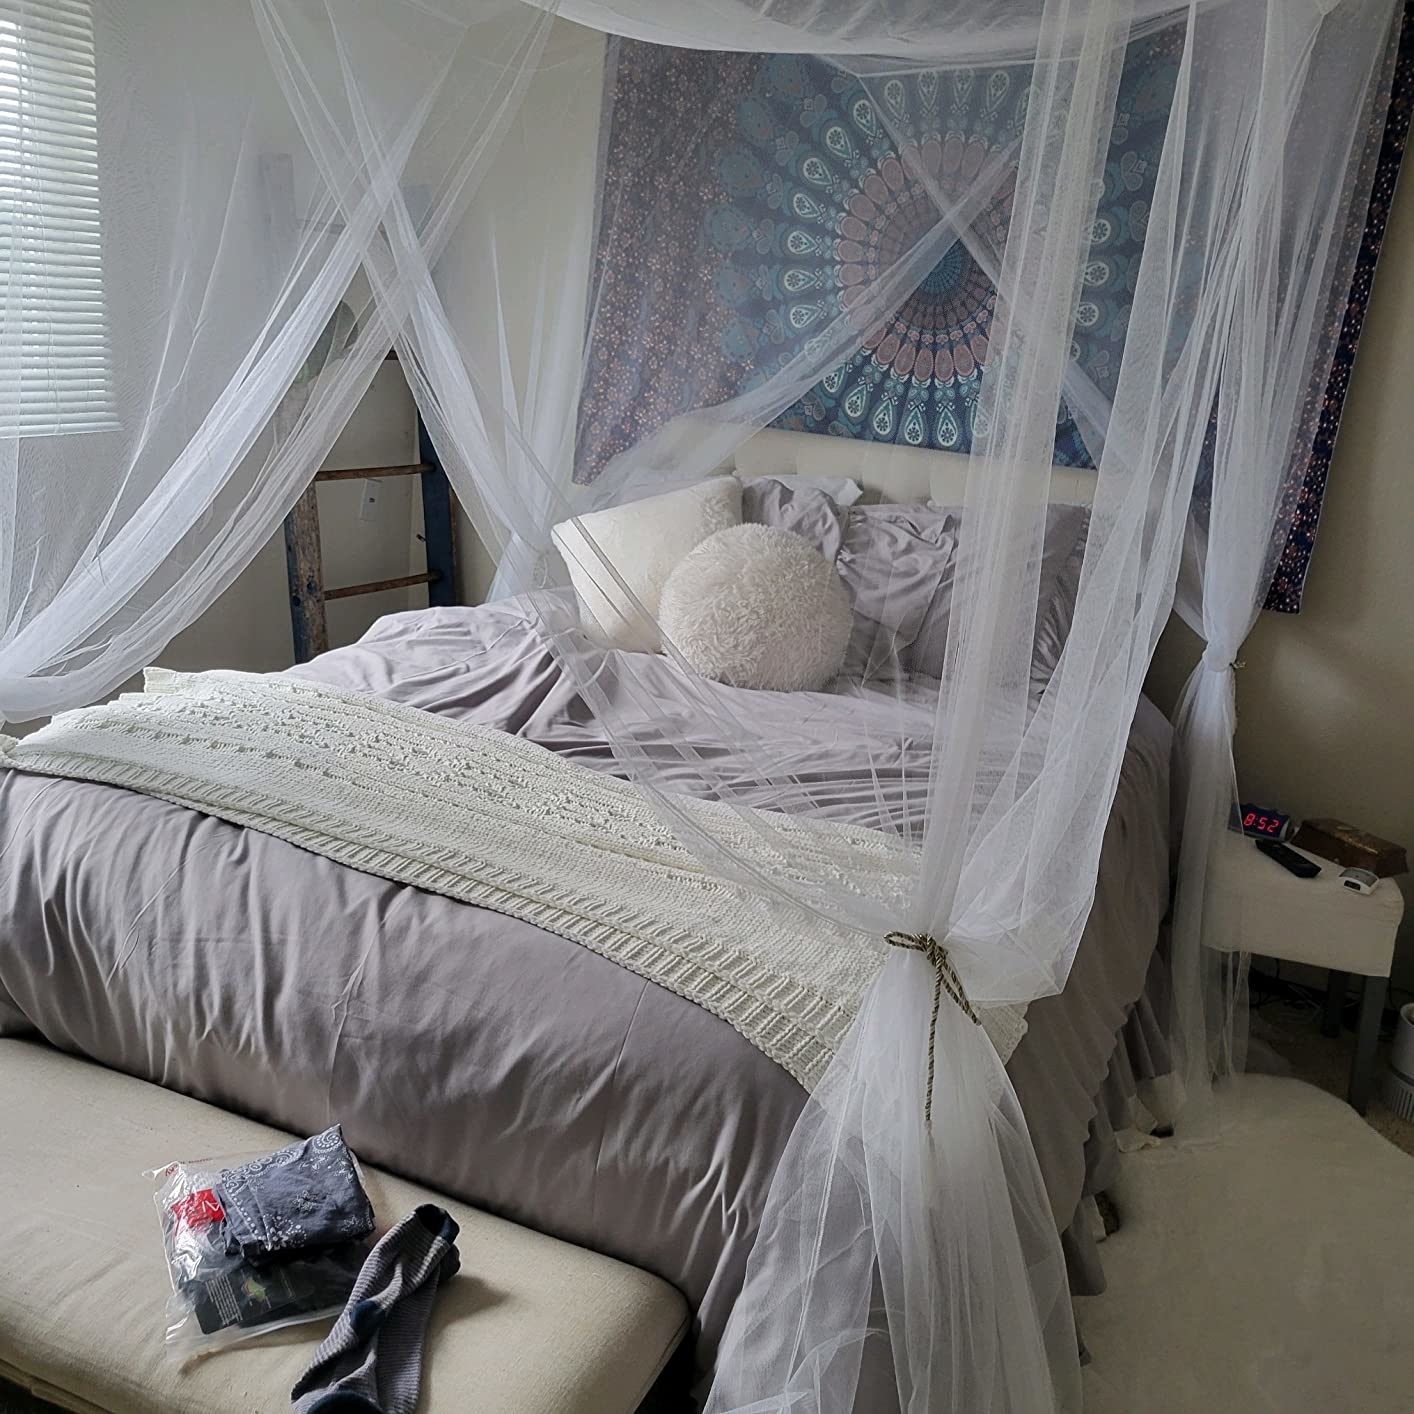 a bed canopy strung up above a bed